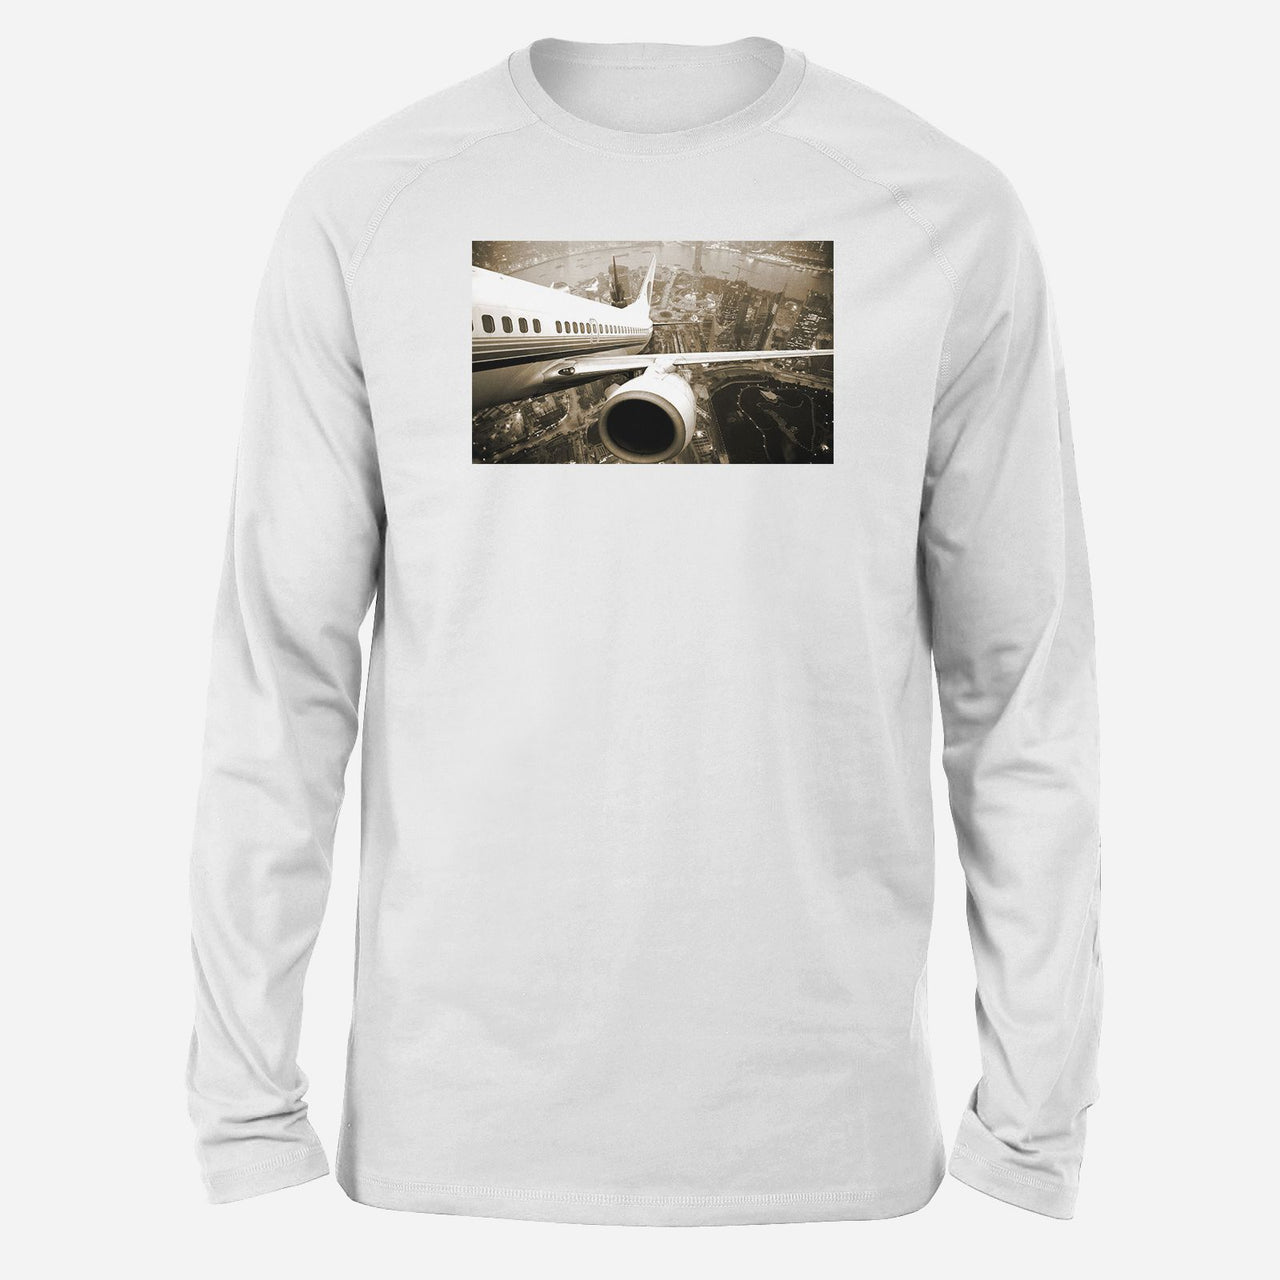 Departing Aircraft & City Scene behind Designed Long-Sleeve T-Shirts